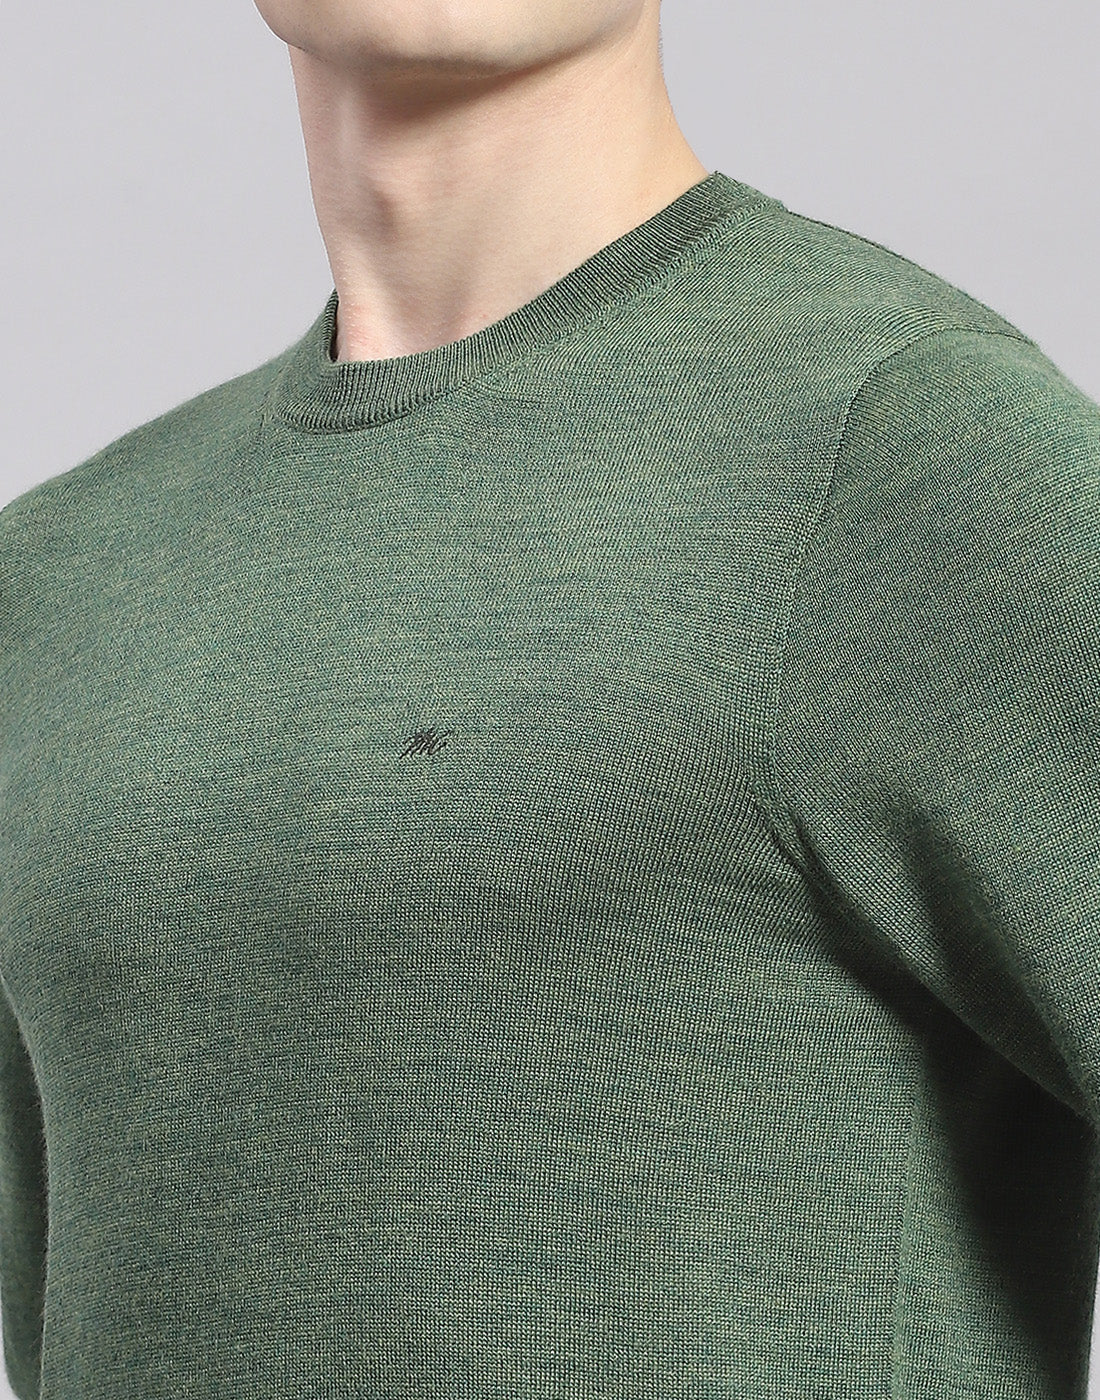 Men Green Solid Round Neck Full Sleeve Pullover